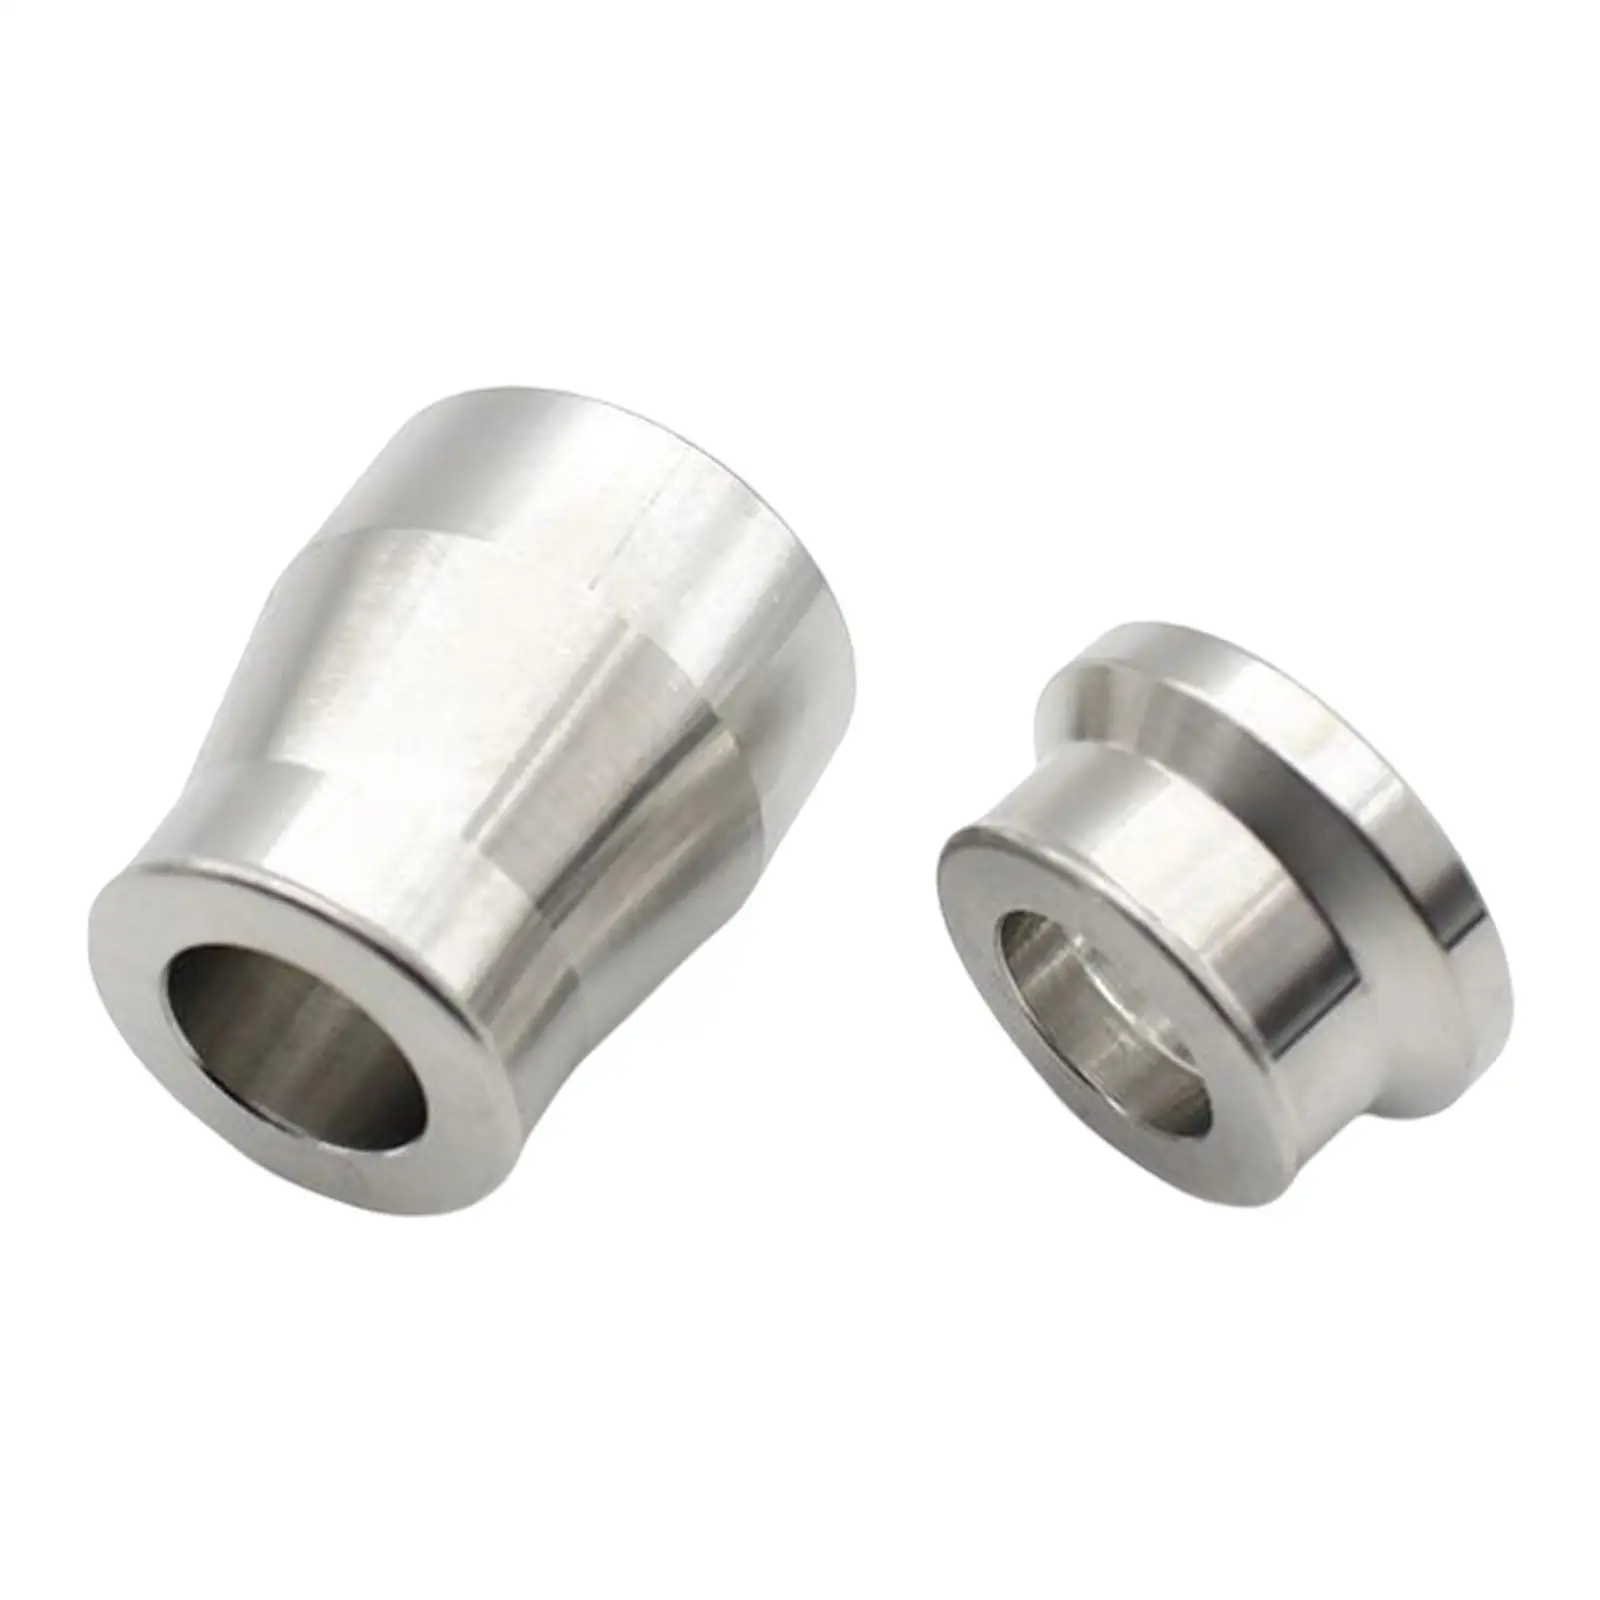 Modified Front Wheel Bushings Durable Spare Parts for Kymco Krv180